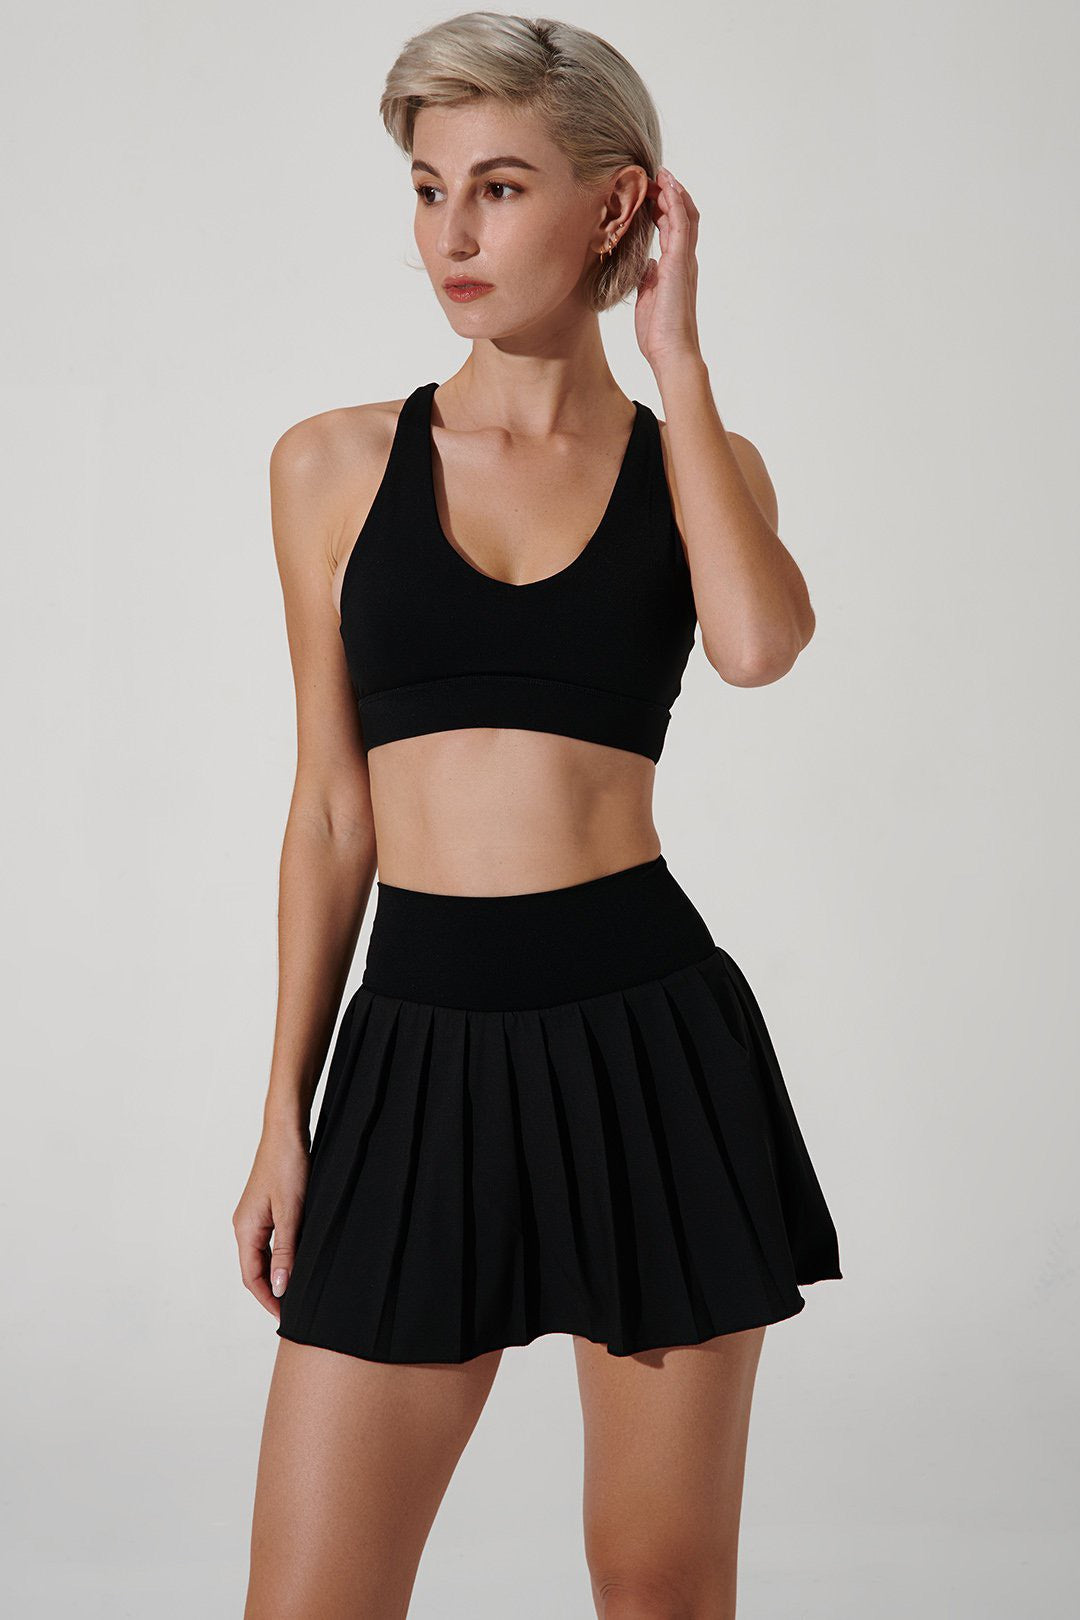 Serena Williams black tennis skirt for women, style OW-0039-WSK-BK, in a stylish black color.